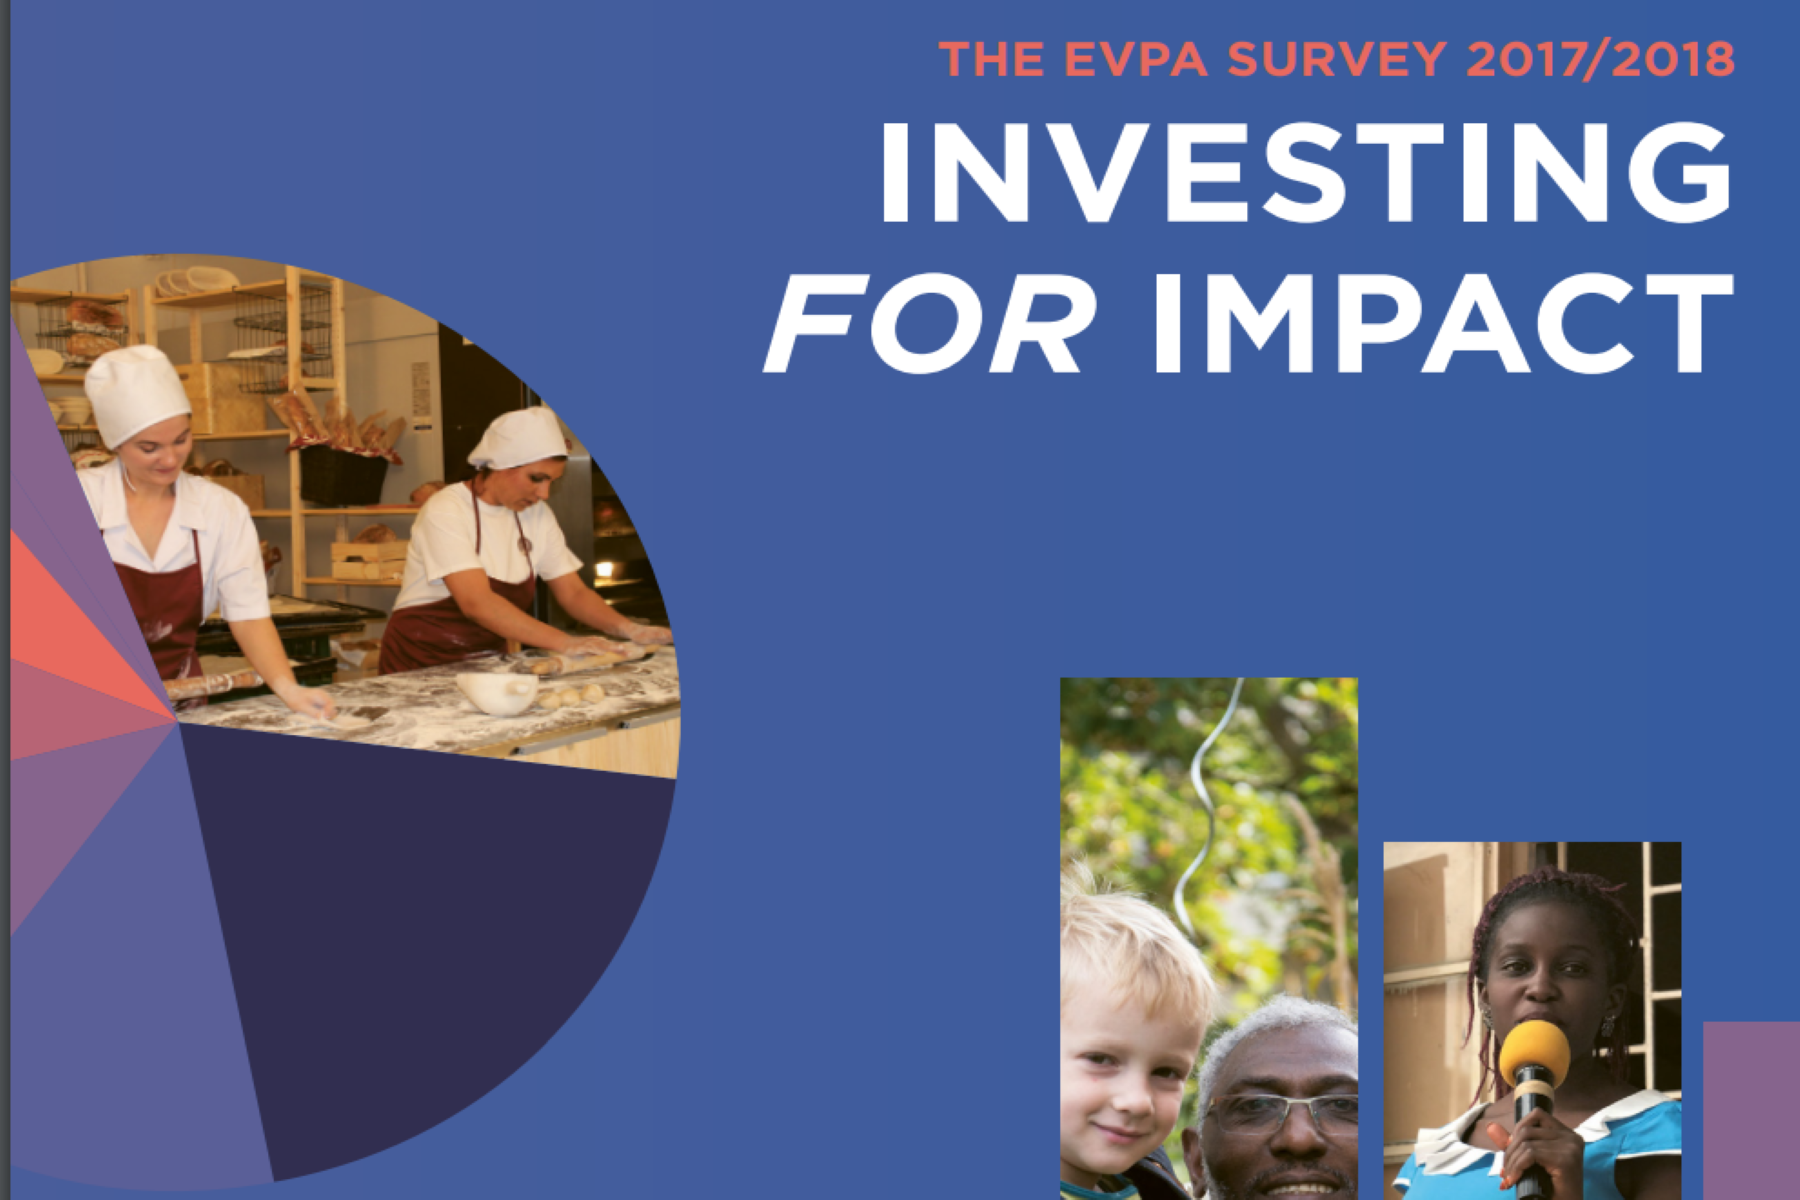 Investing for Impact | The EVPA Survey 2017/2018